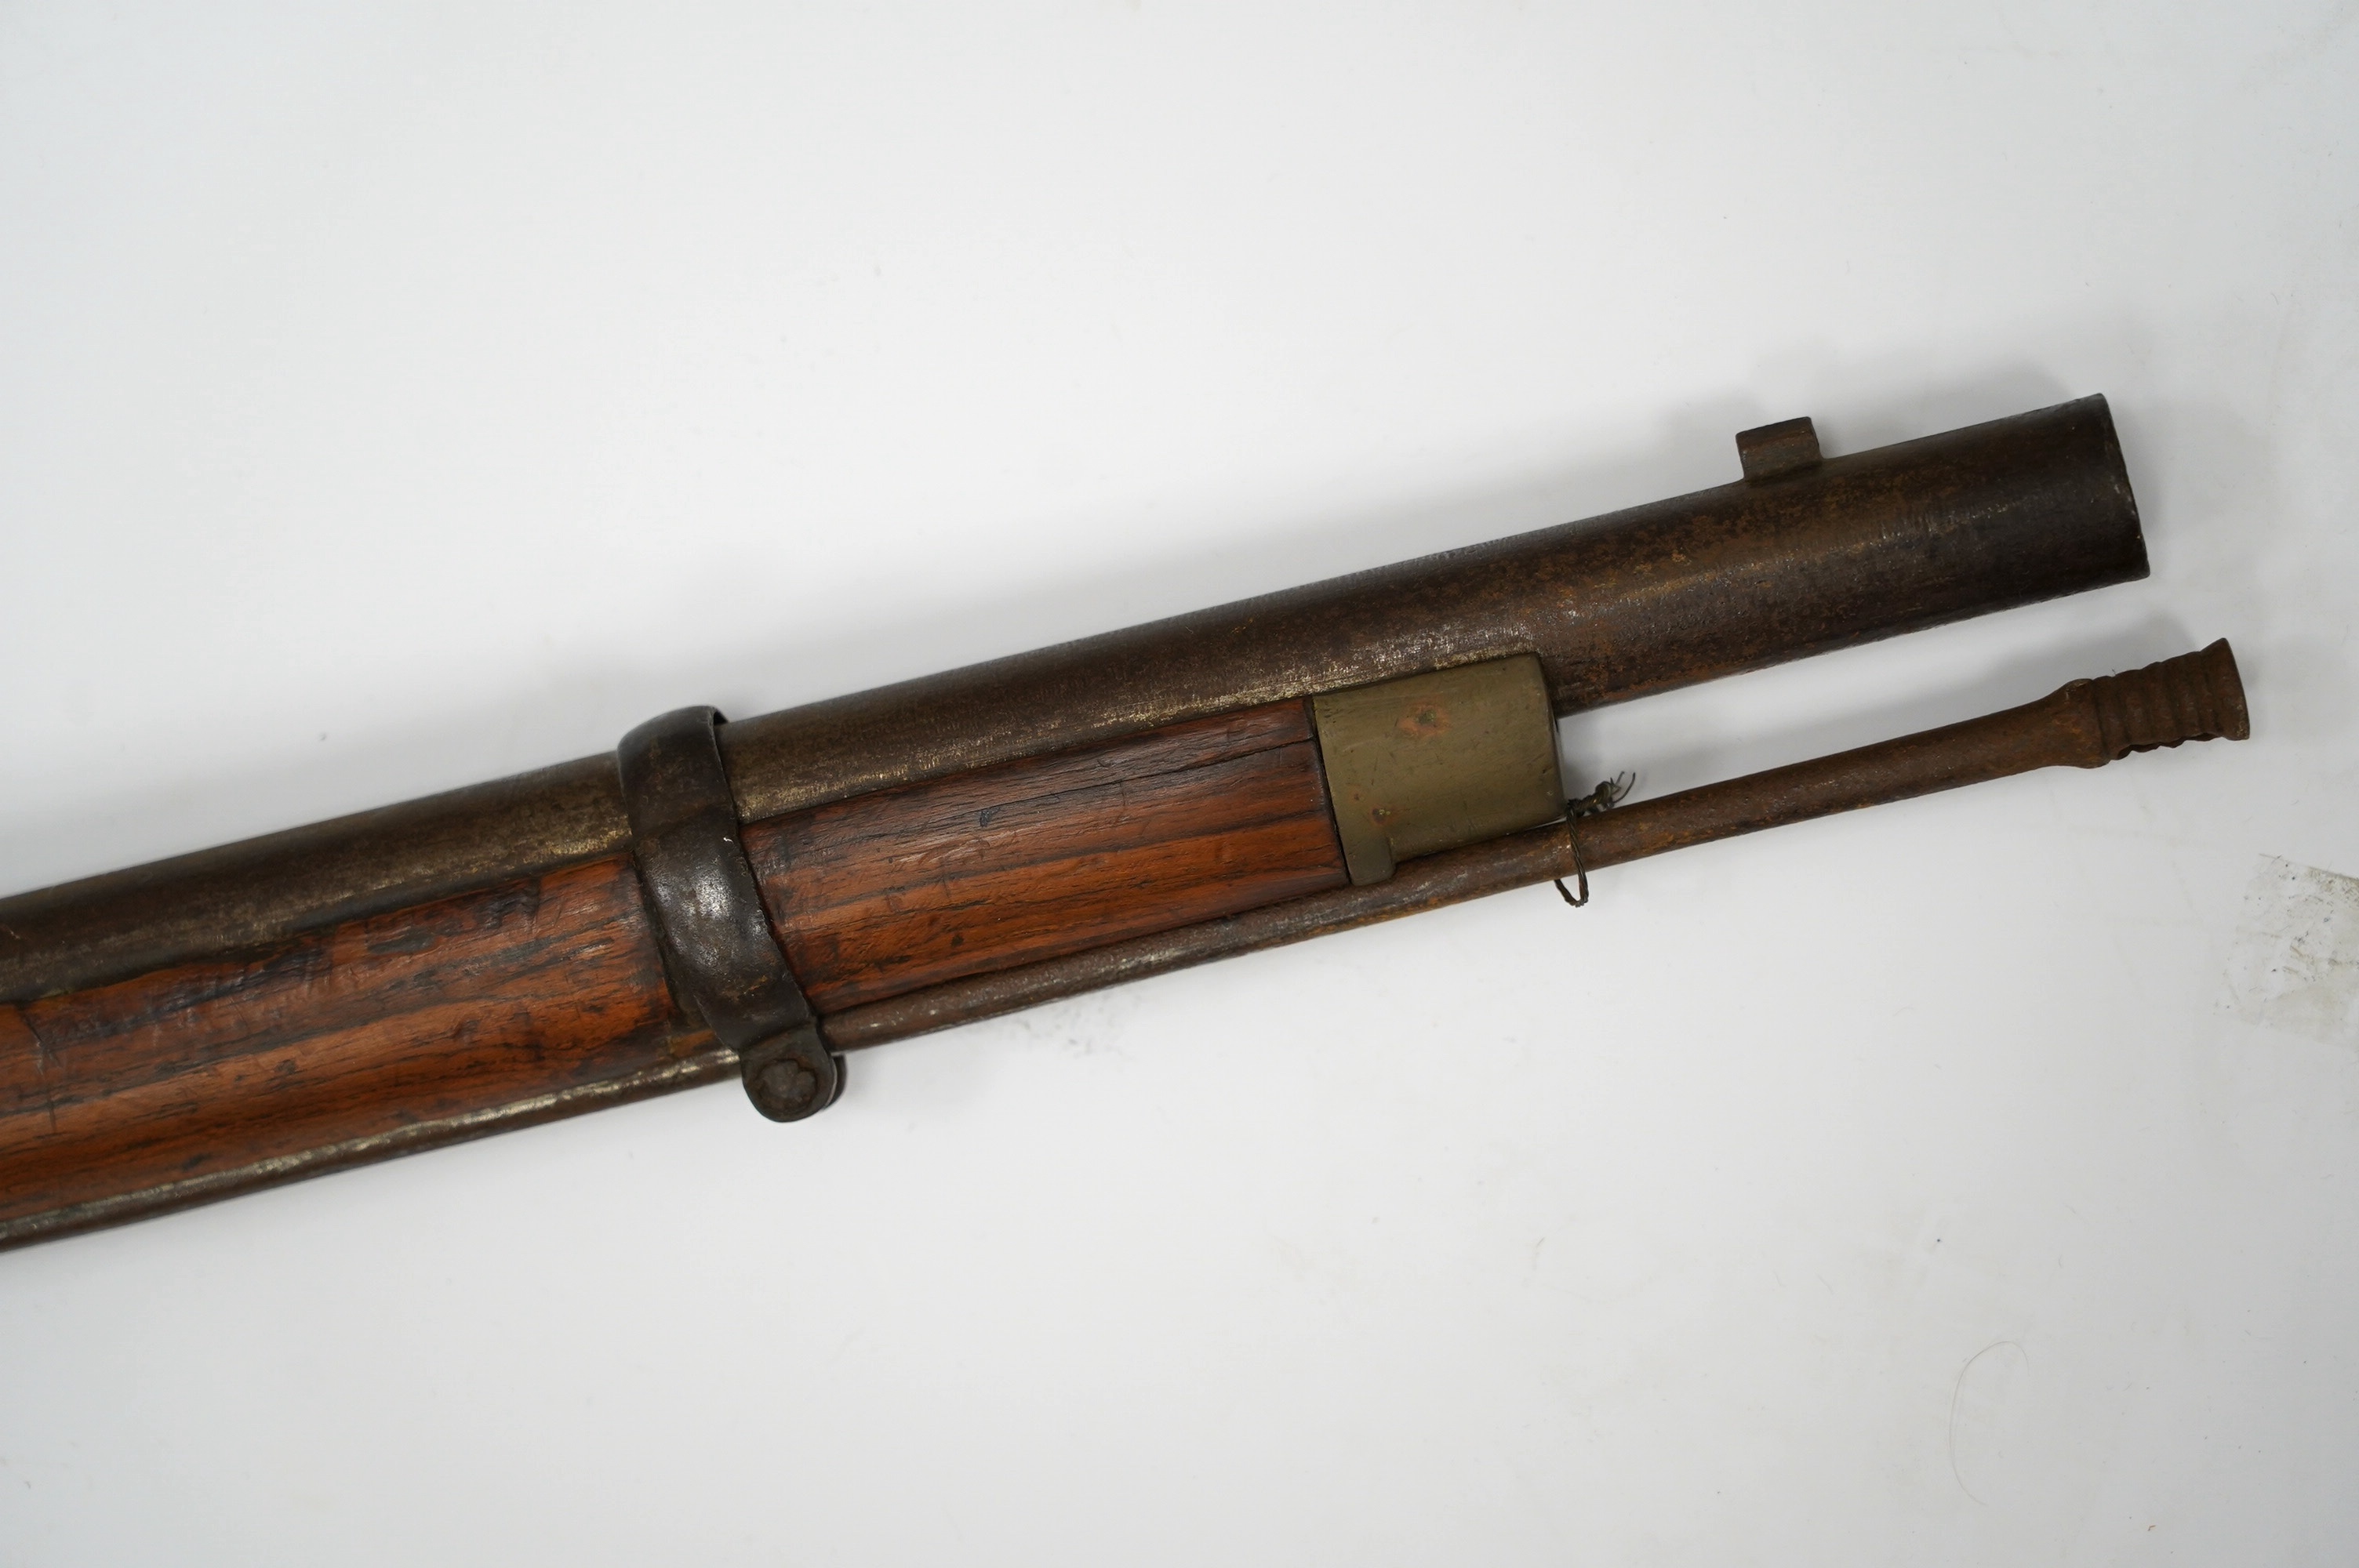 A decorative Indian military three band percussion musket, brass mounts, steel barrel bands and ramrod, barrel 98.5cm. Condition - fair, some age wear overall